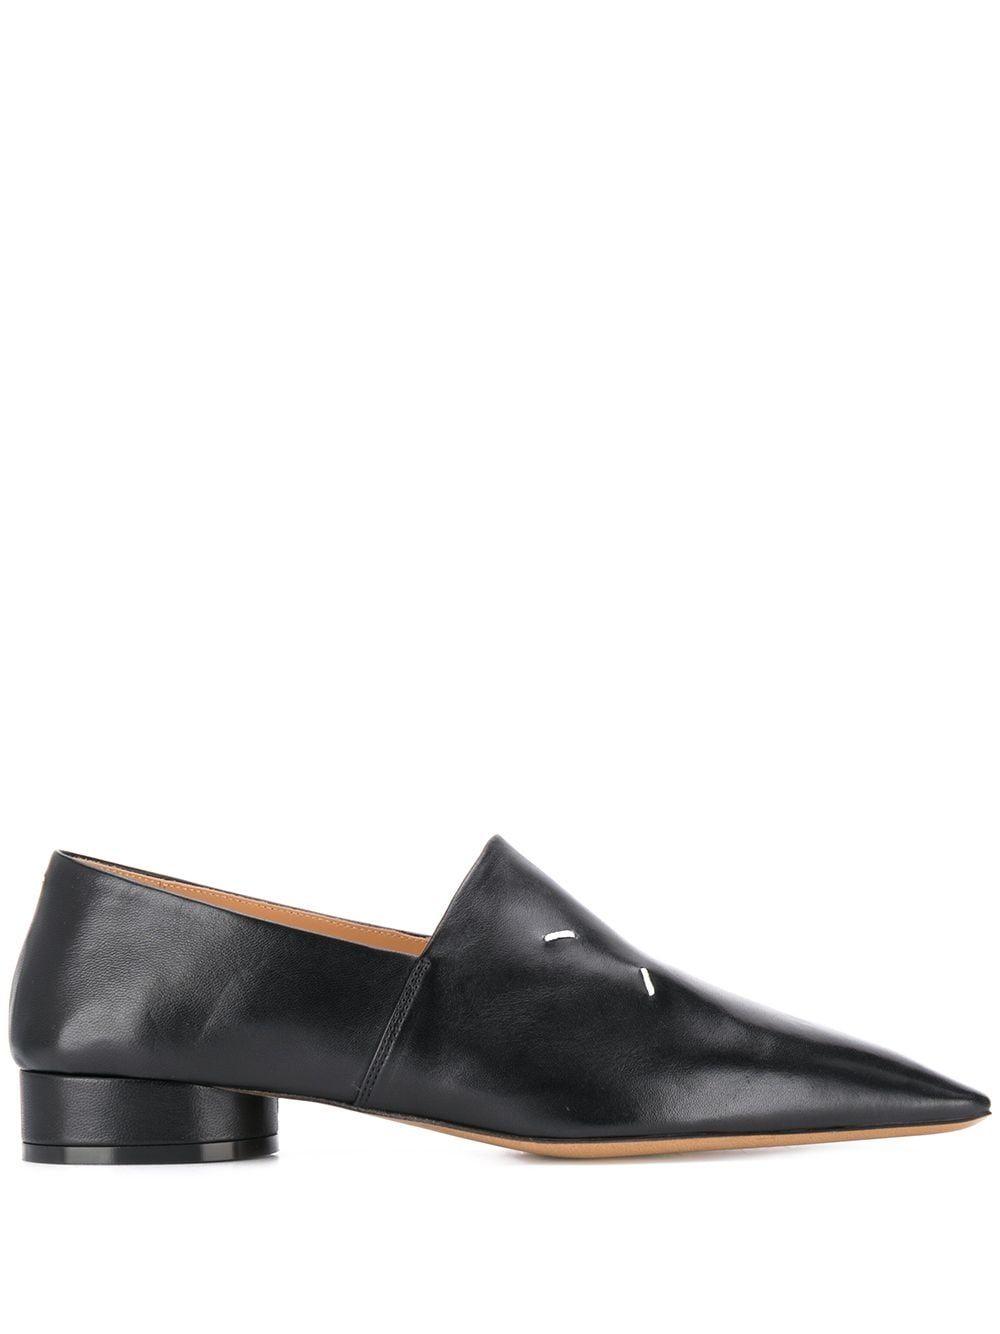 Maison Margiela Leather Loafers in Black - Lyst